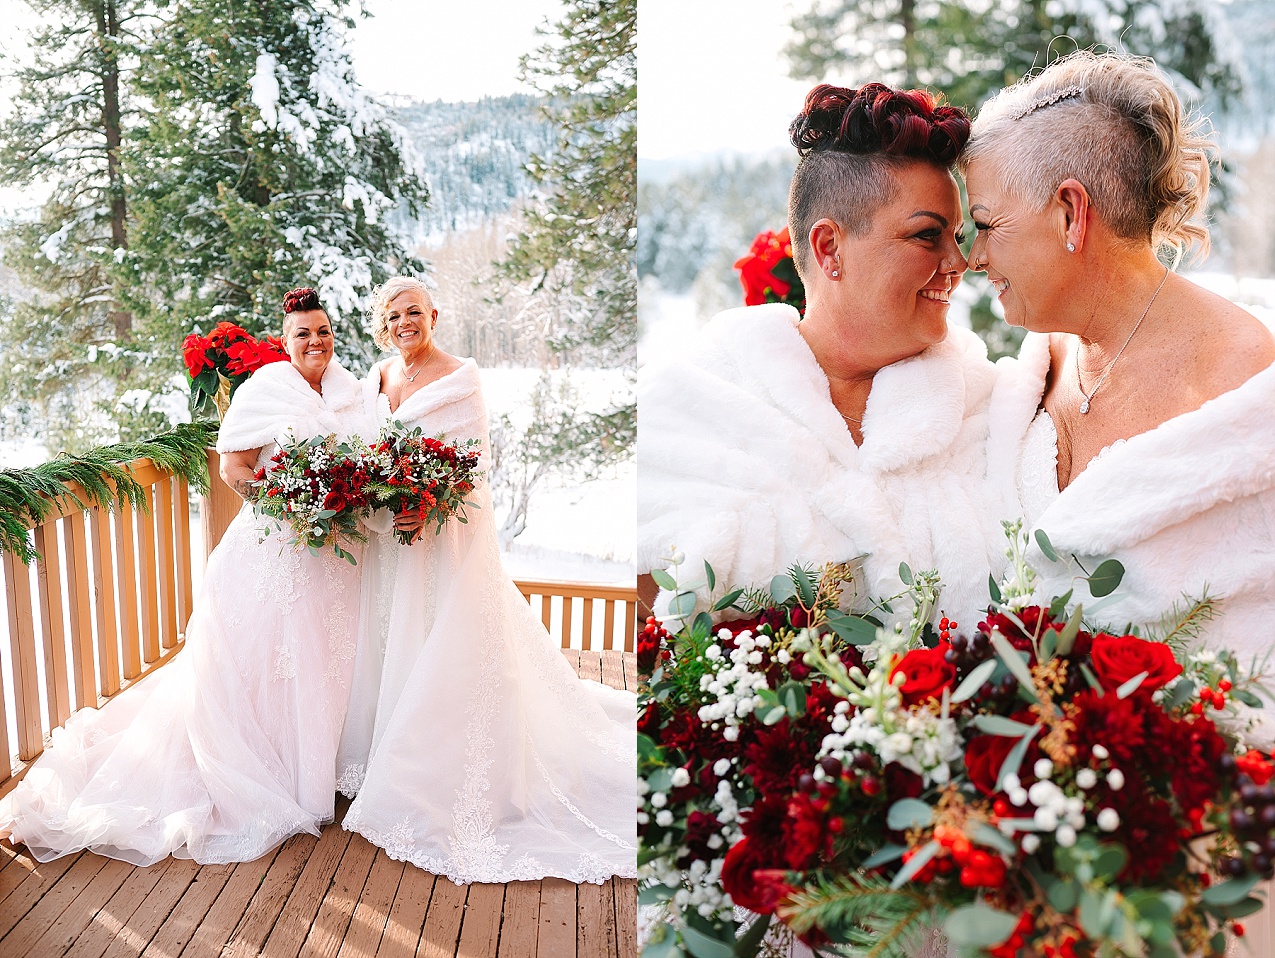 Wintery Pine River Ranch wedding bride and bride in dresses in the snow